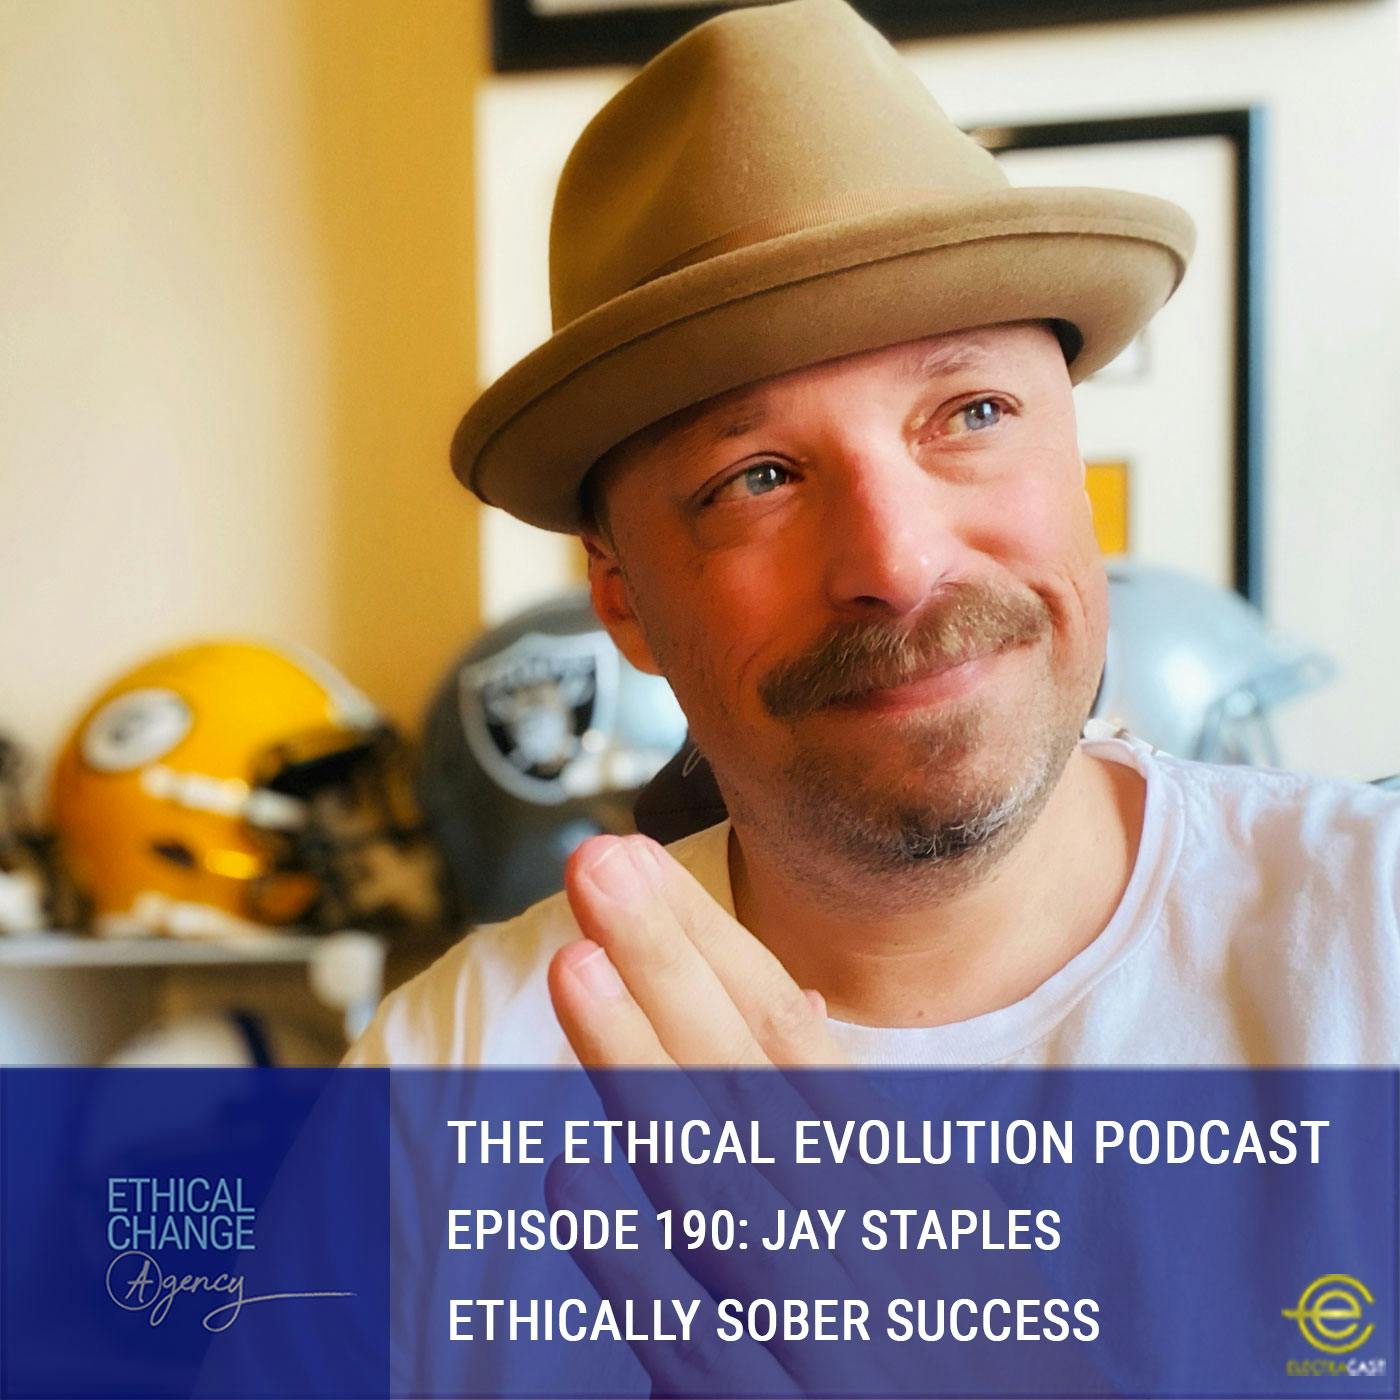 Ethically Sober Success with Jay Staples